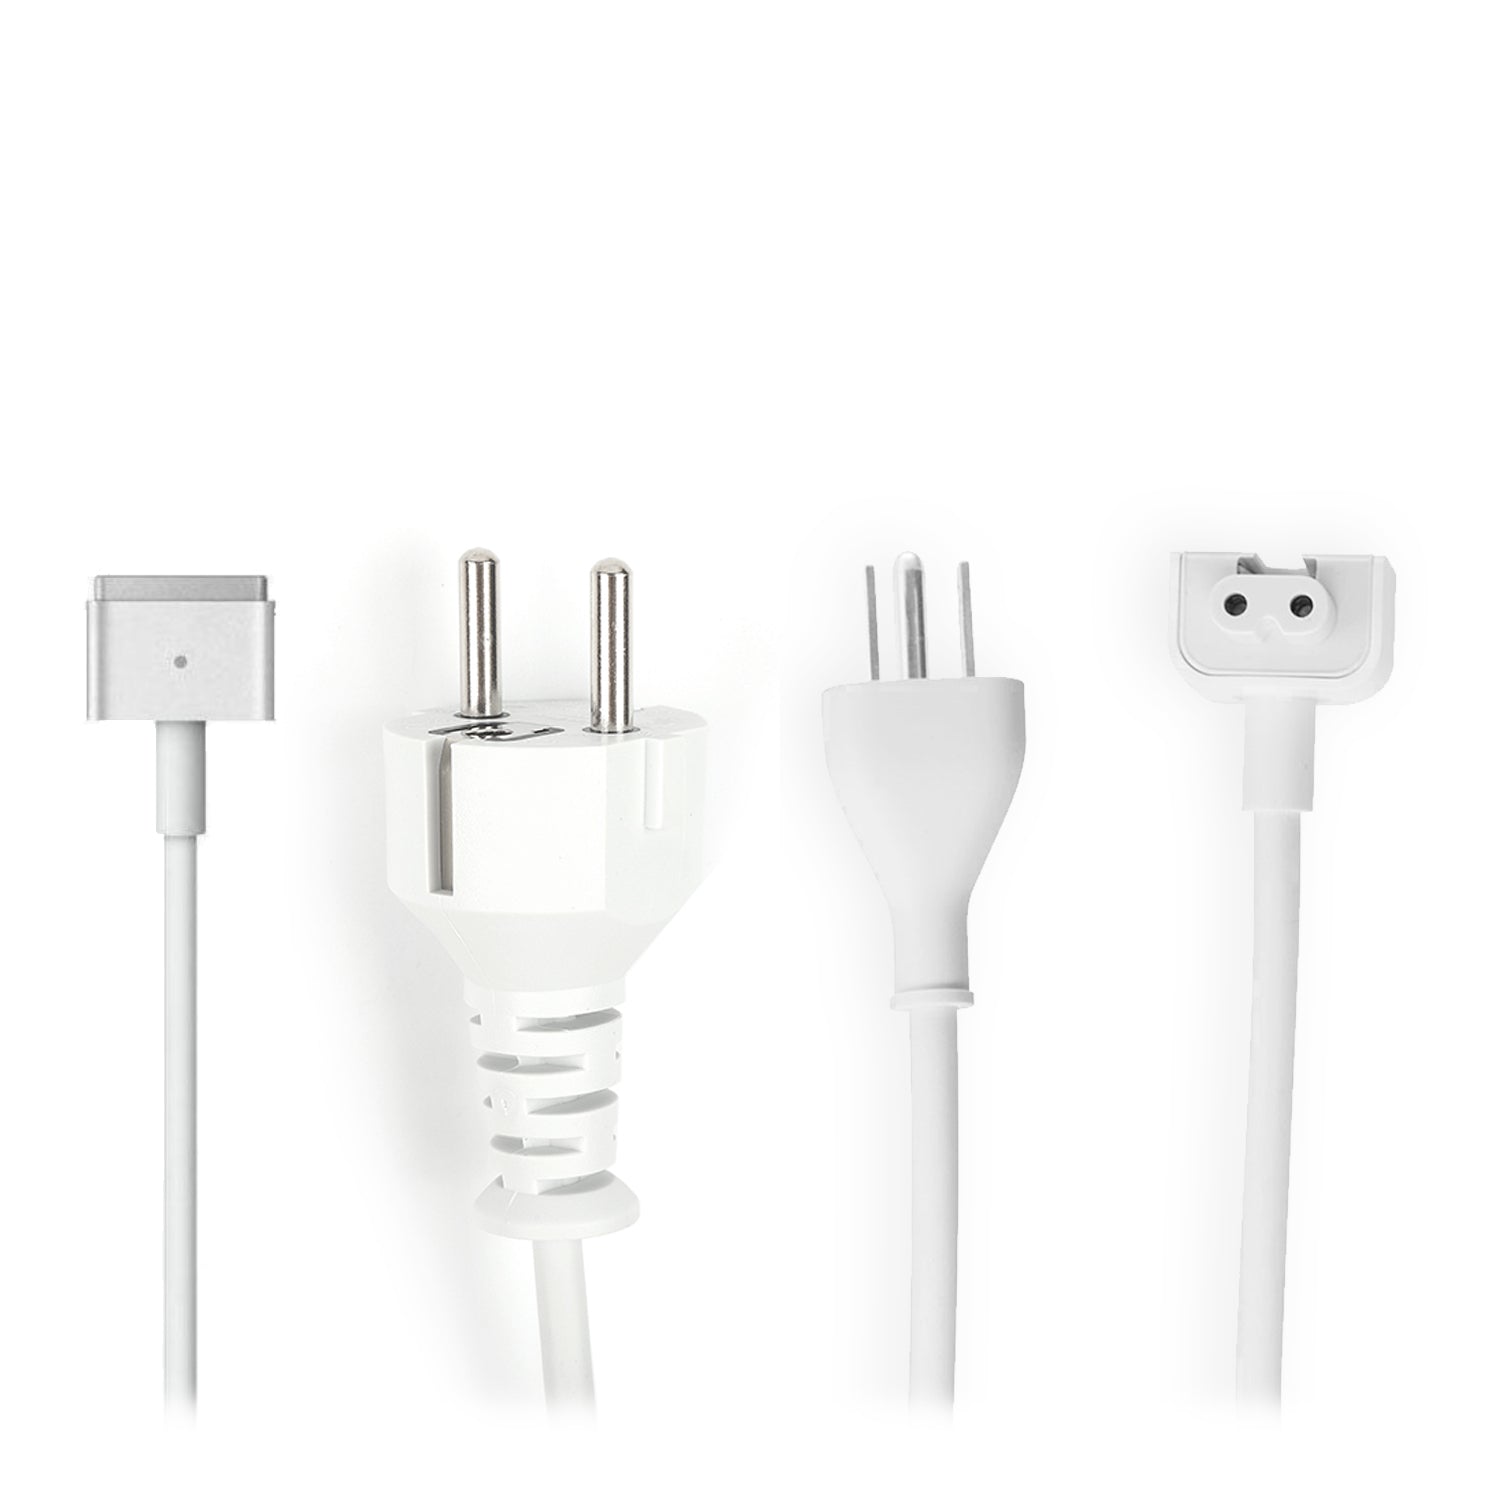 60W Charger Compatible for Apple Macbook, 16.5V - 3.65A